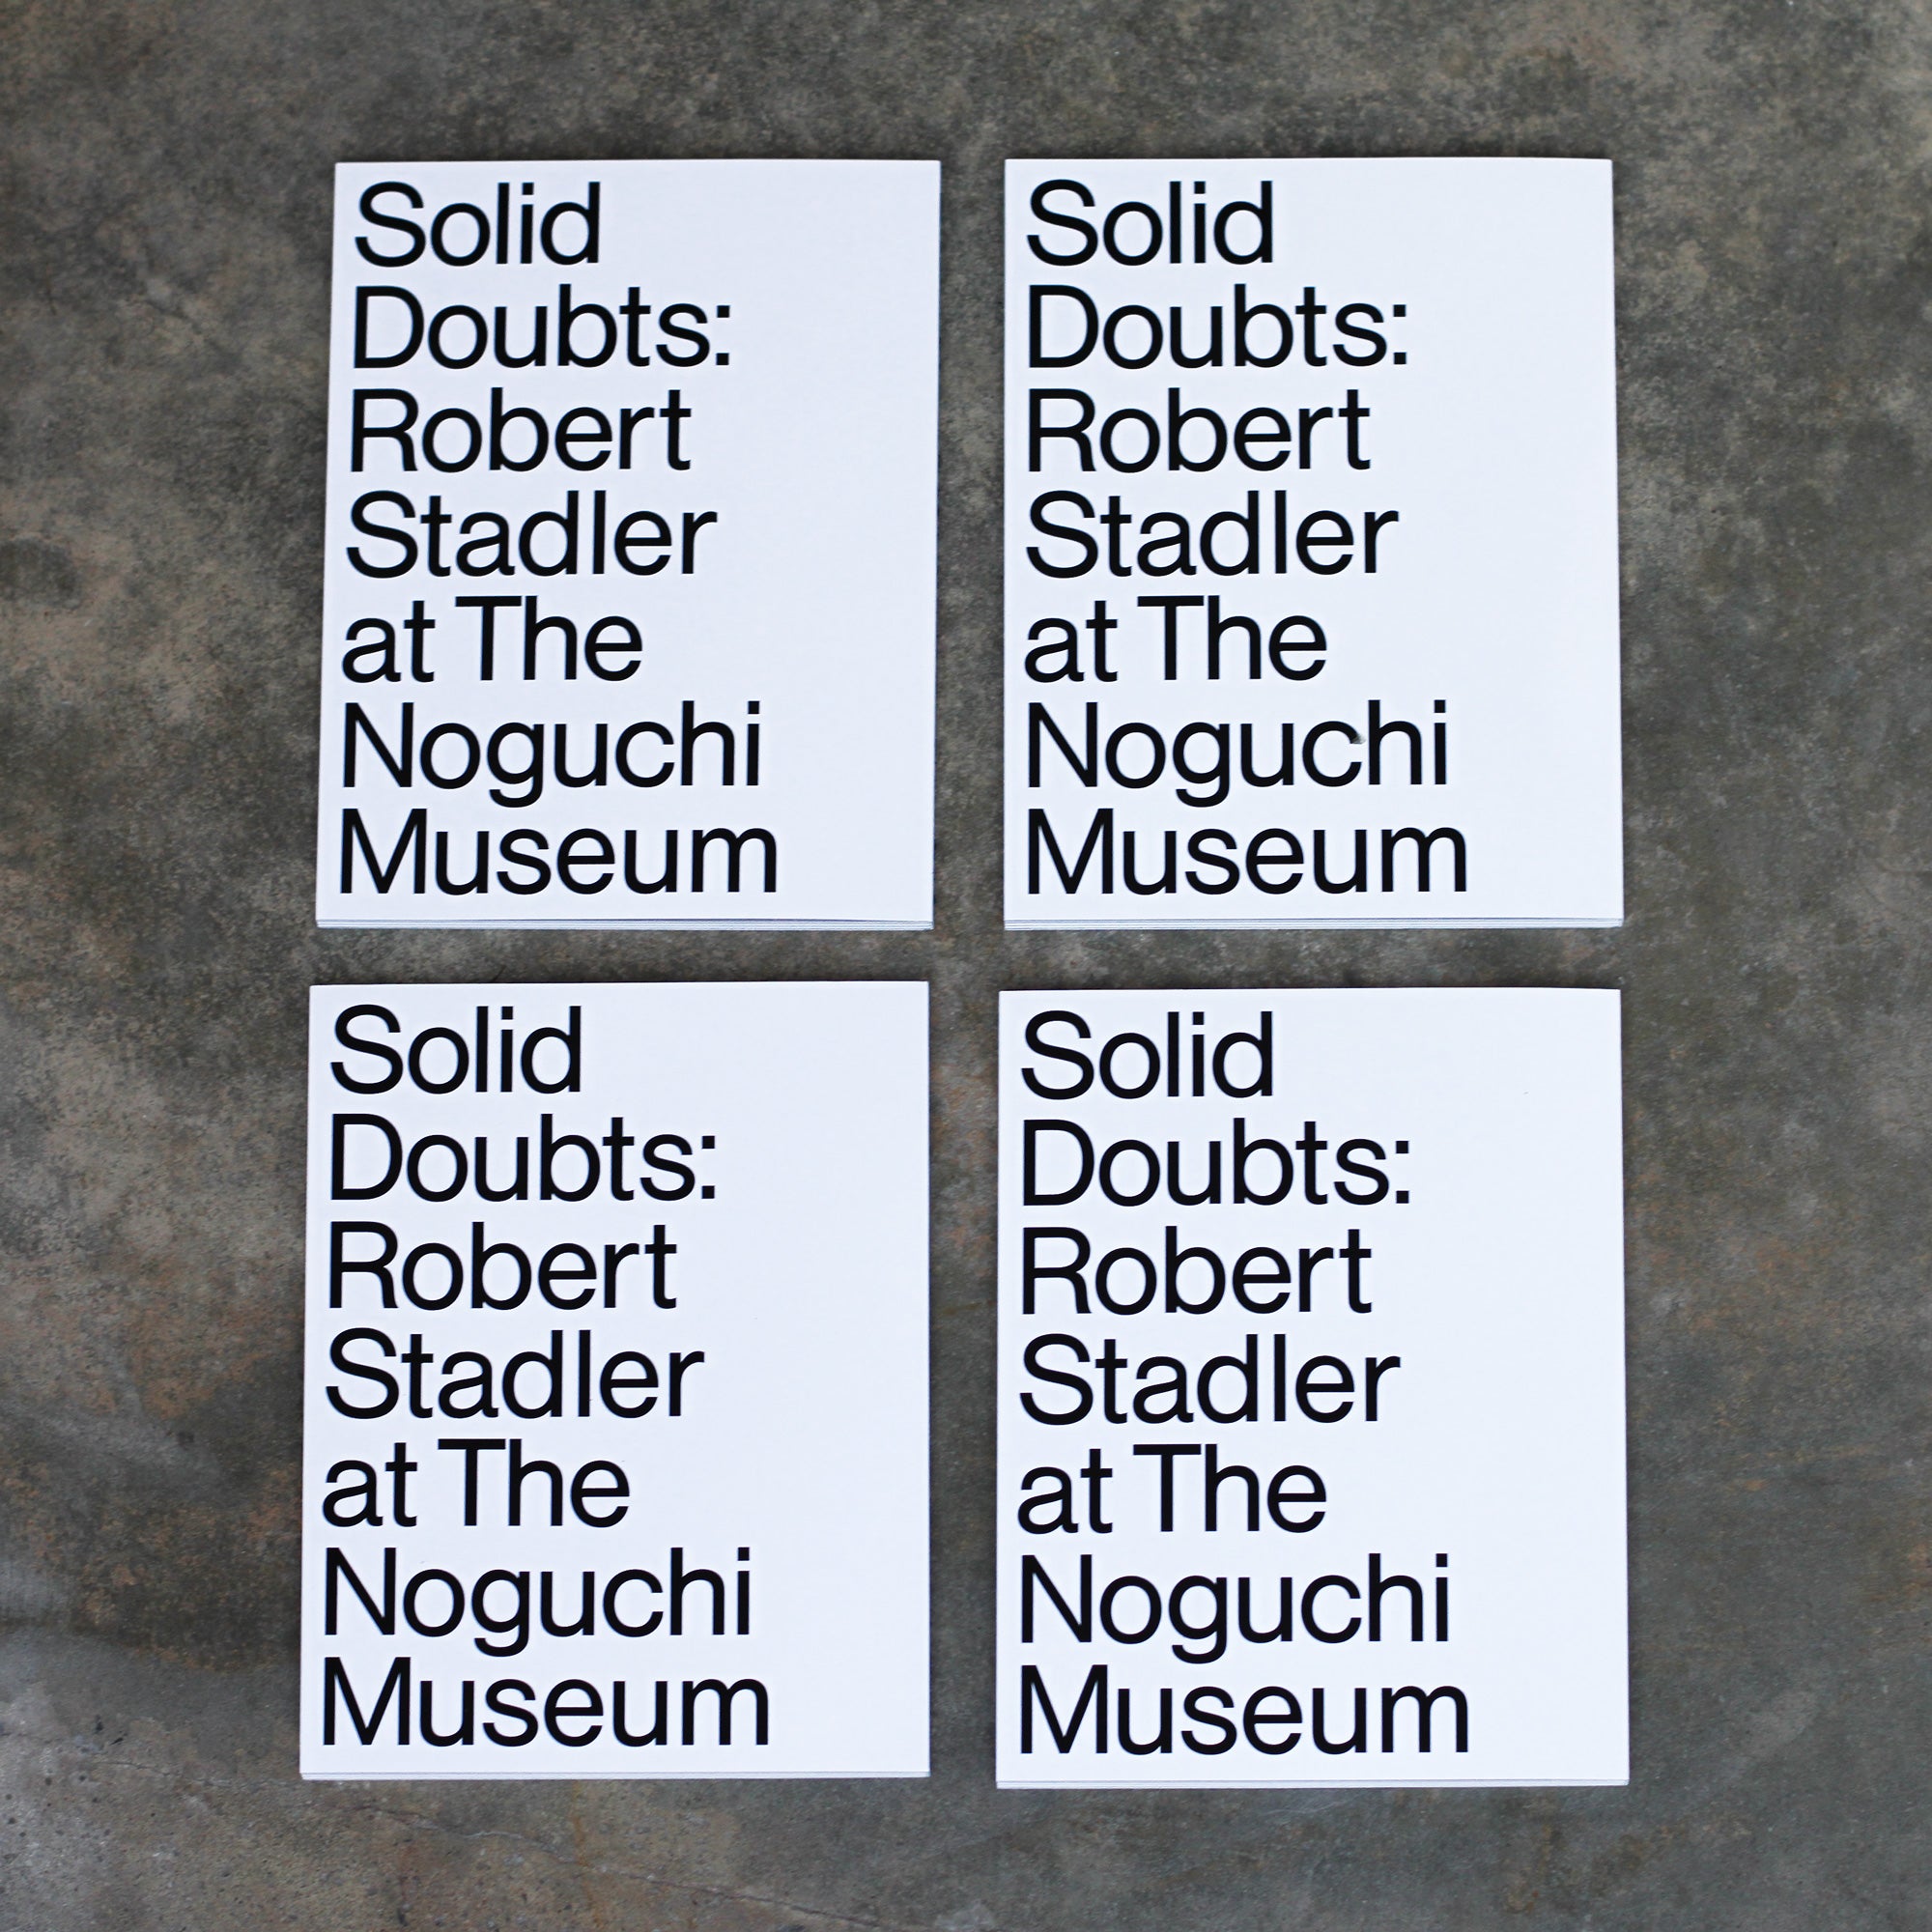 Back covers, with large sans serif text across entire cover: Solid Doubts: Robert Stadler at The Noguchi Museum